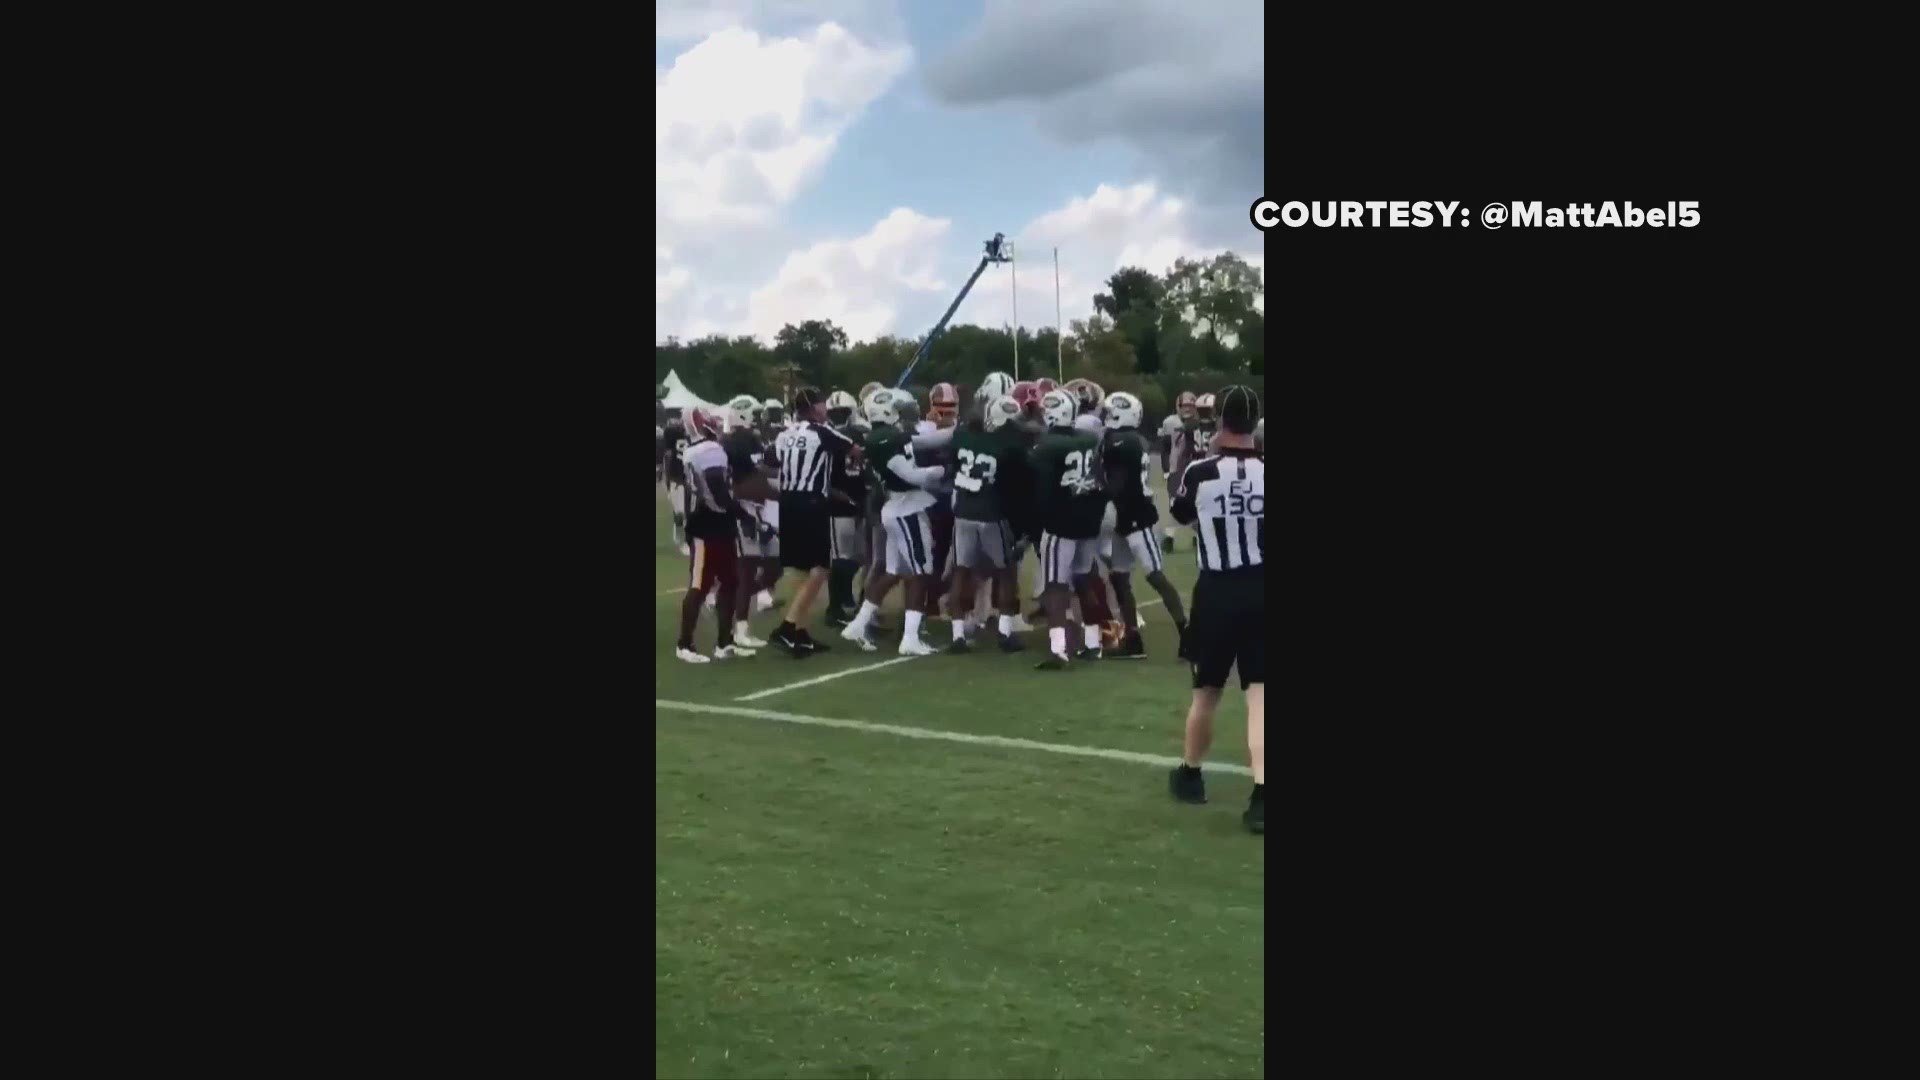 Tensions flared in a big way as a fight broke out between the Redskins and Jets during a joint practice in Richmond on Sunday.